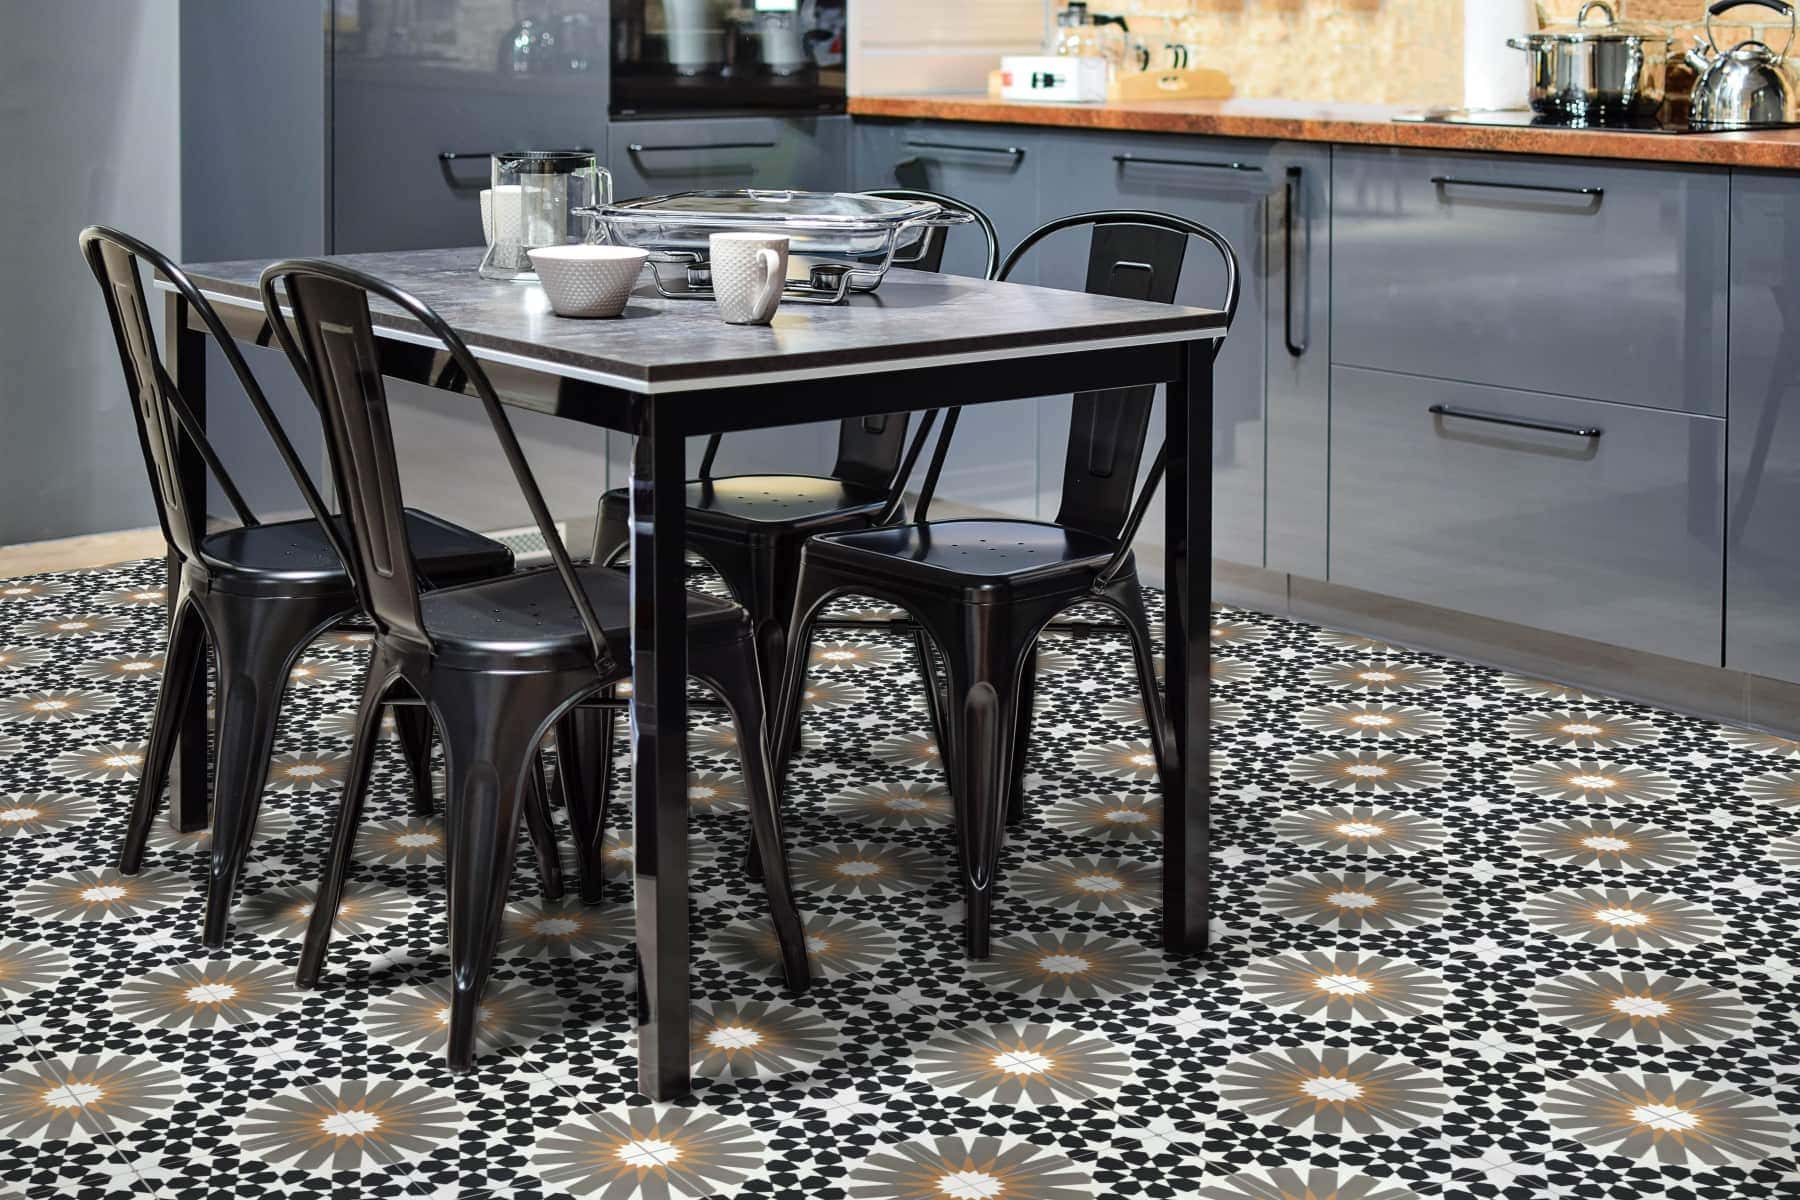 A stunning patterned floor using cement tiles in a kitchen